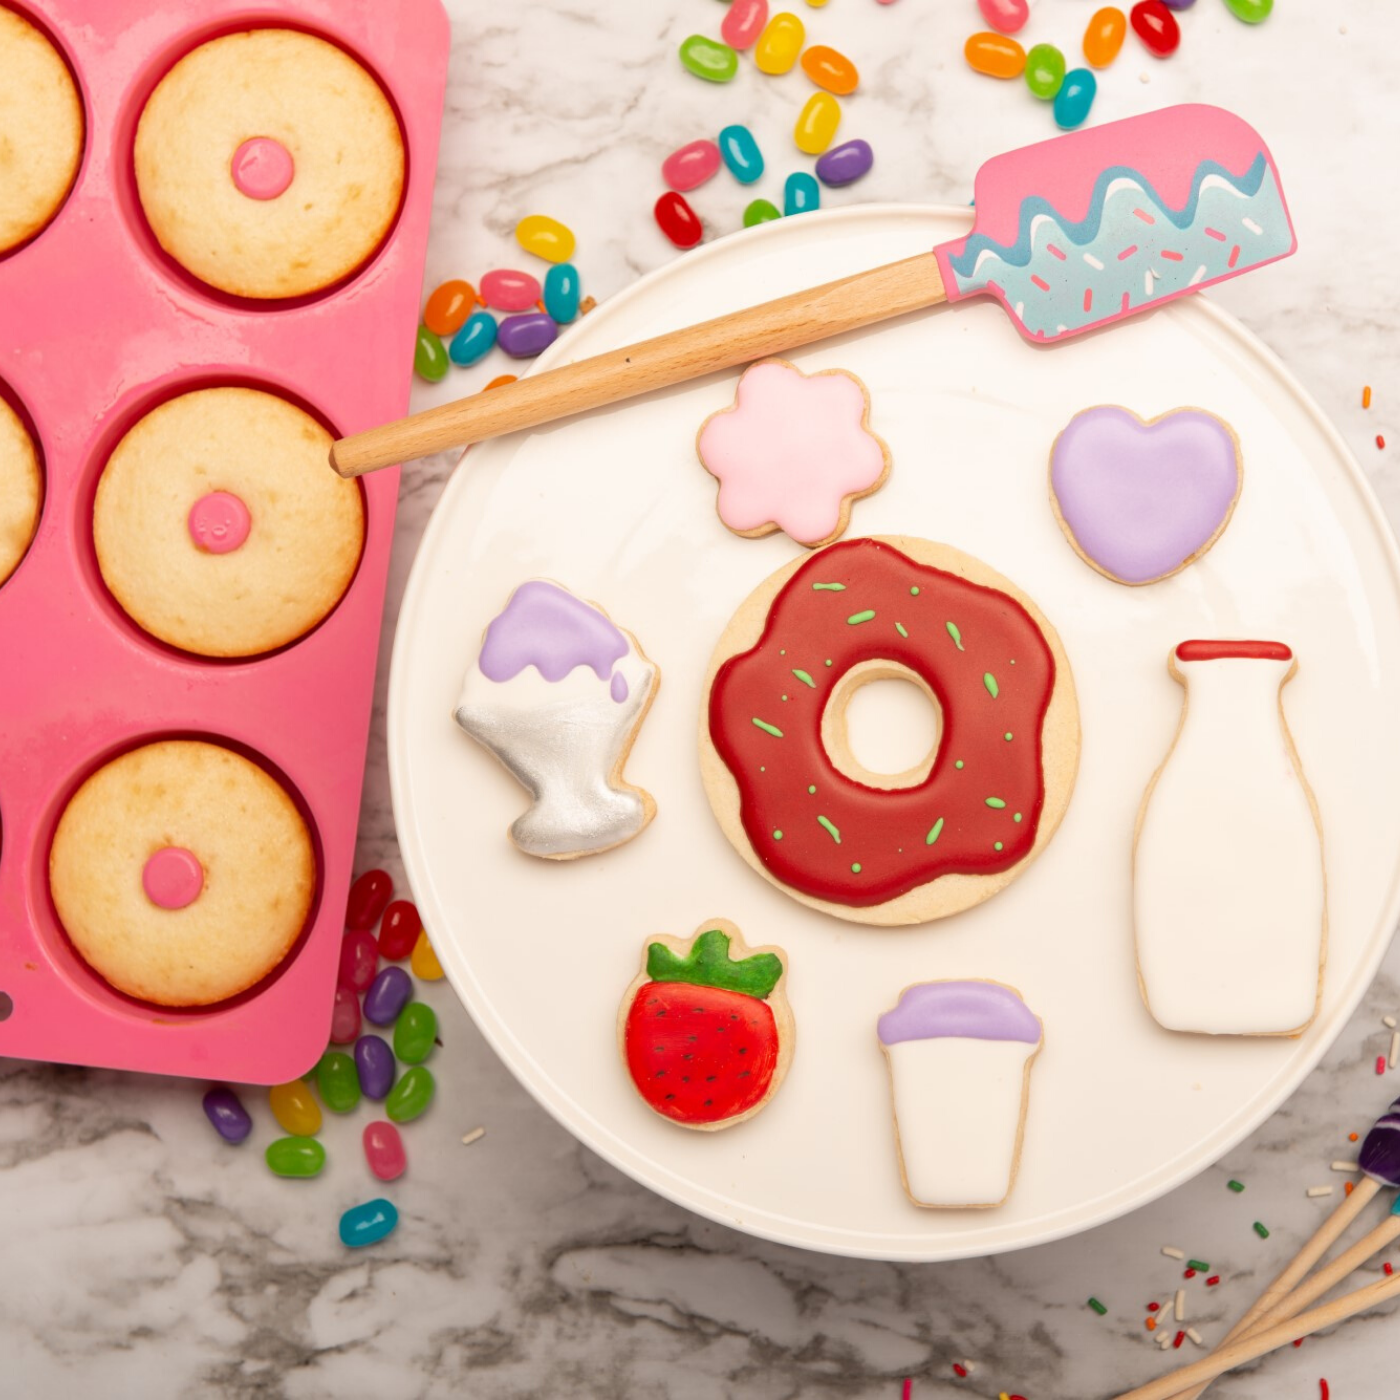 Lifestyle image of donut shaped cupcakes and cookies decorated with frosting